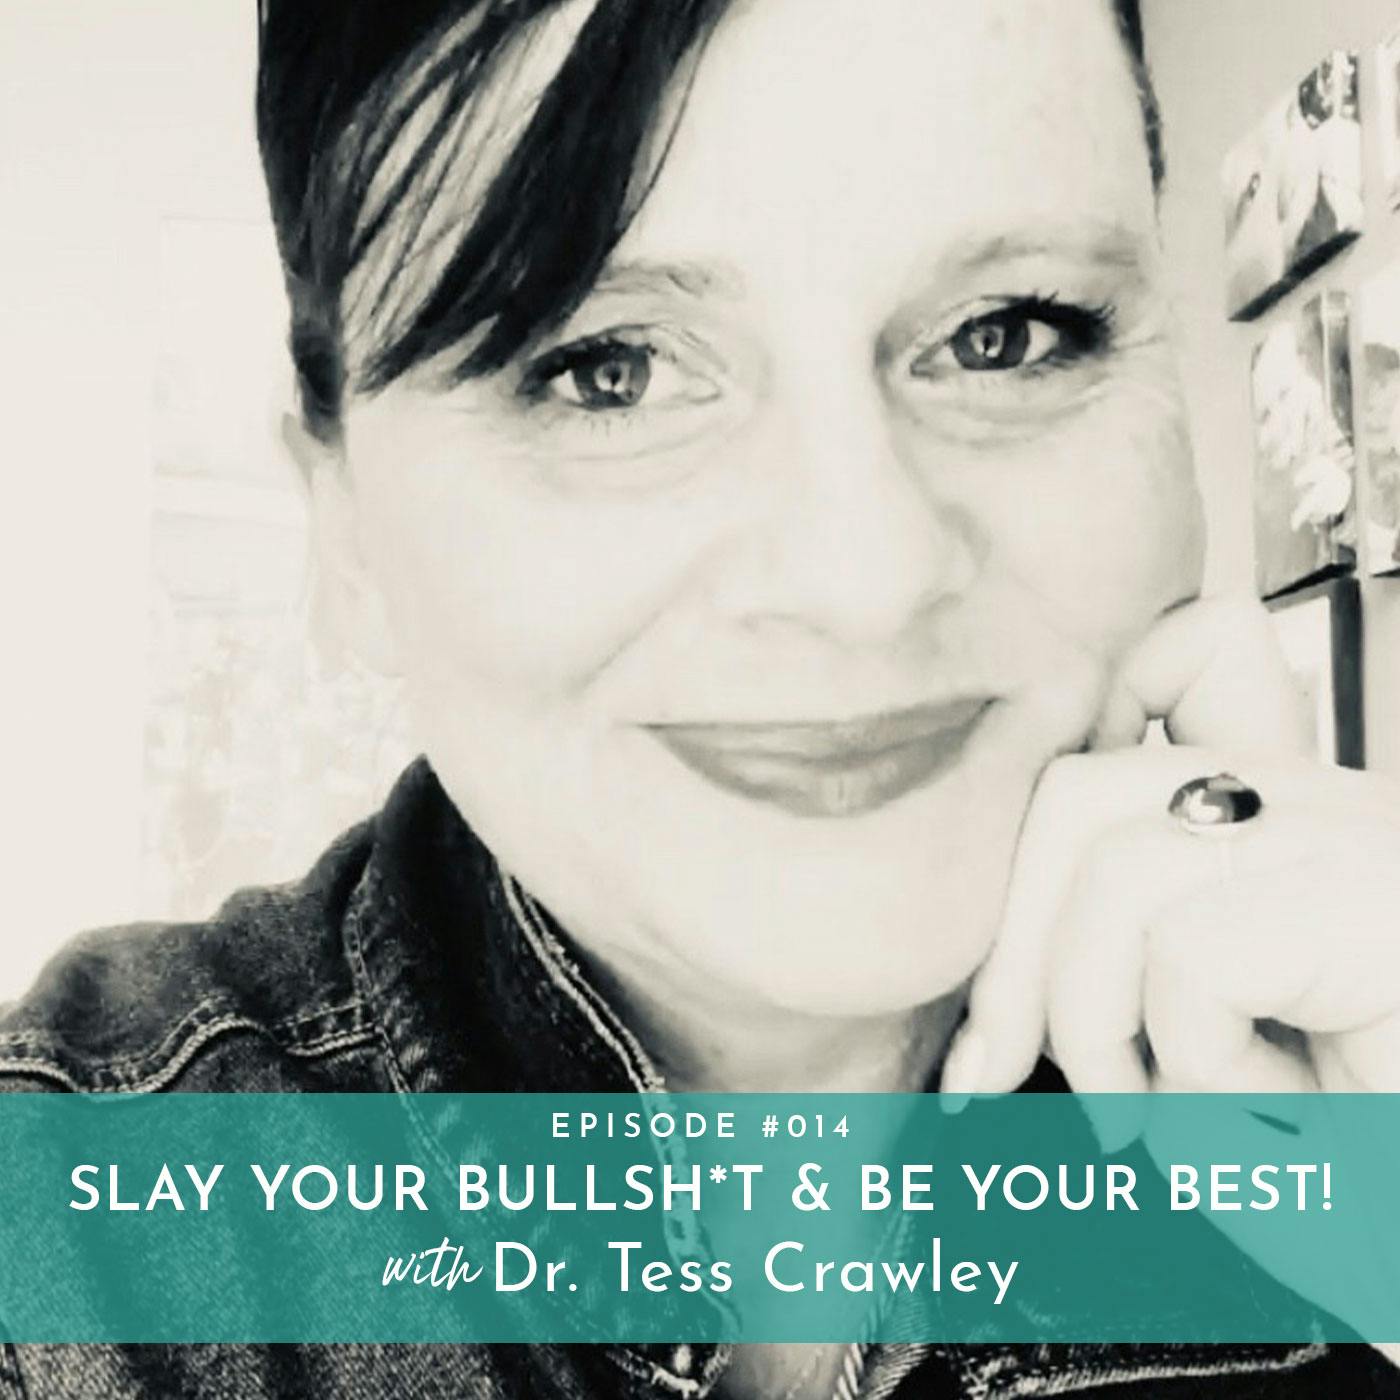 Slay Your Bullsh*t and be Your BEST! with Dr. Tess Crawley